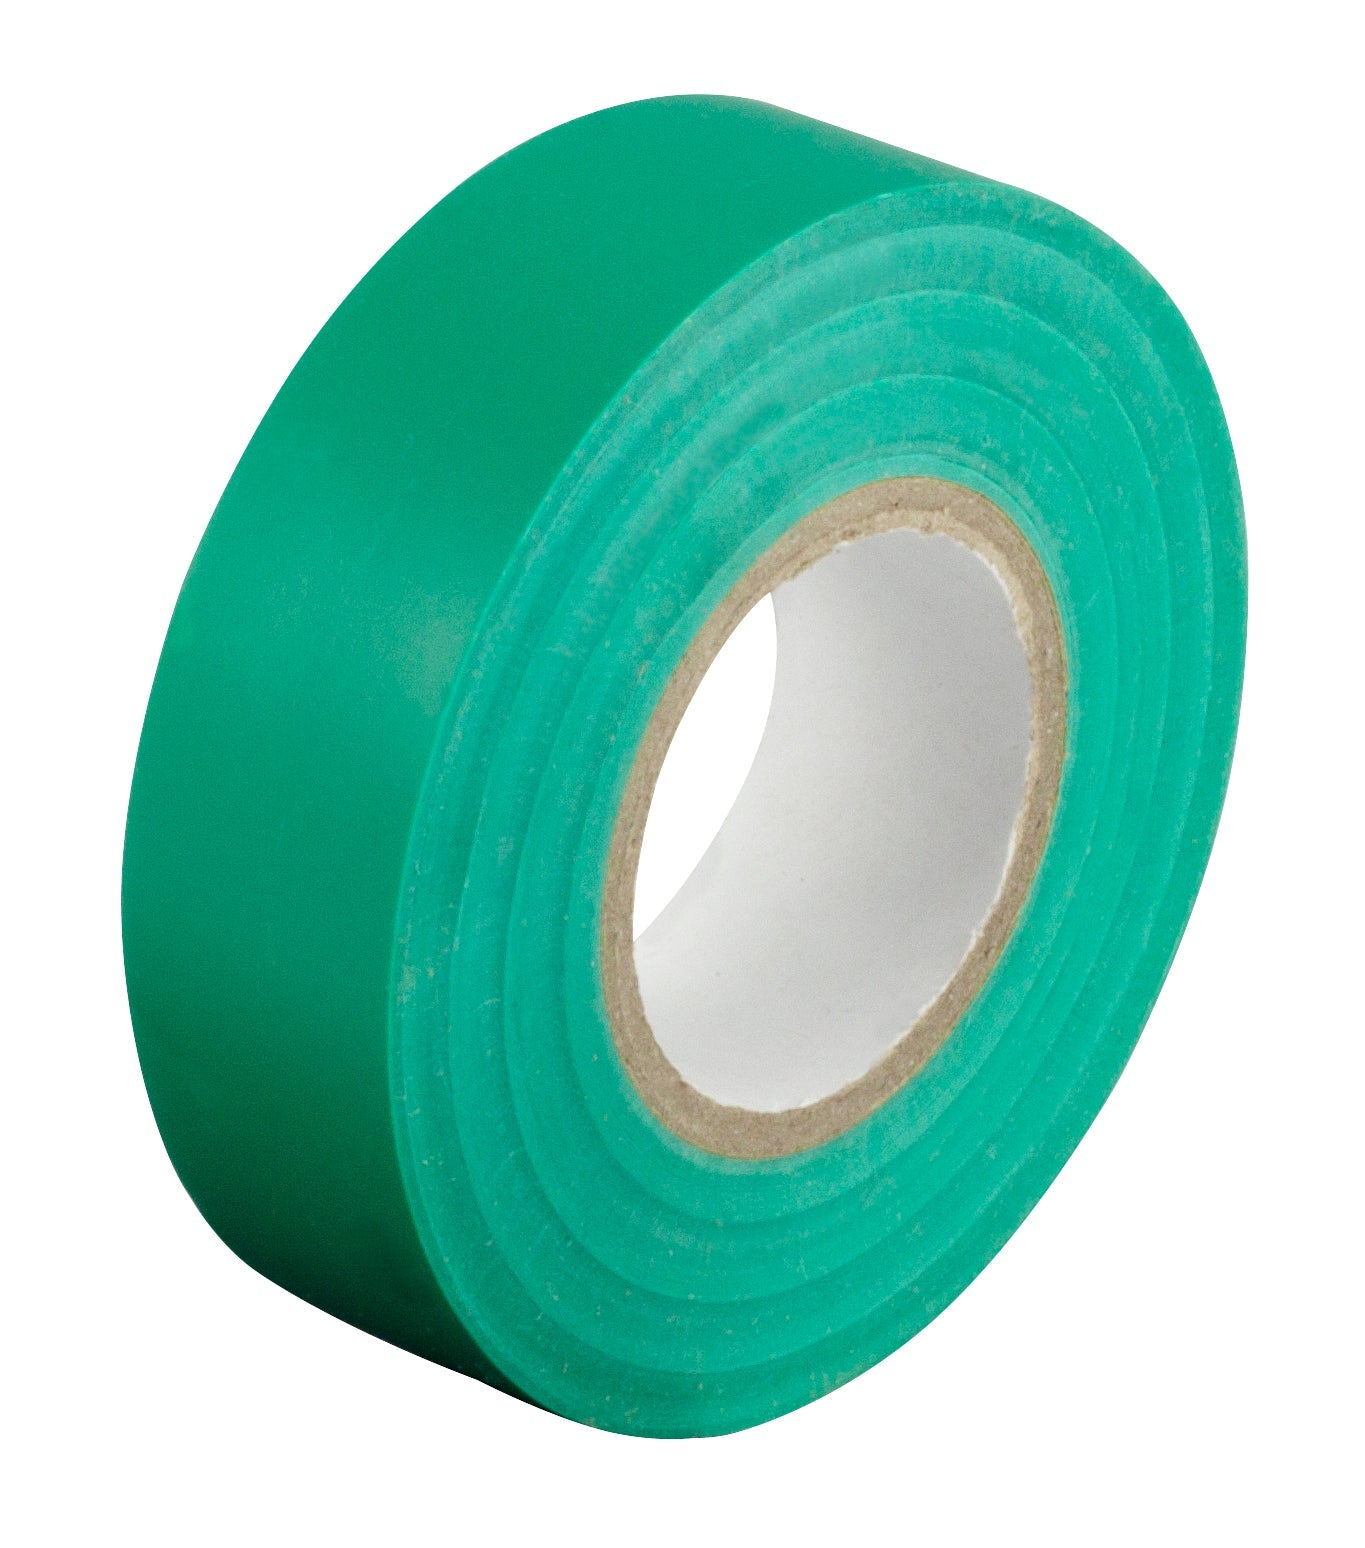 PVC Tape Size: 19mmx20m Roll - Green - Pack of 10